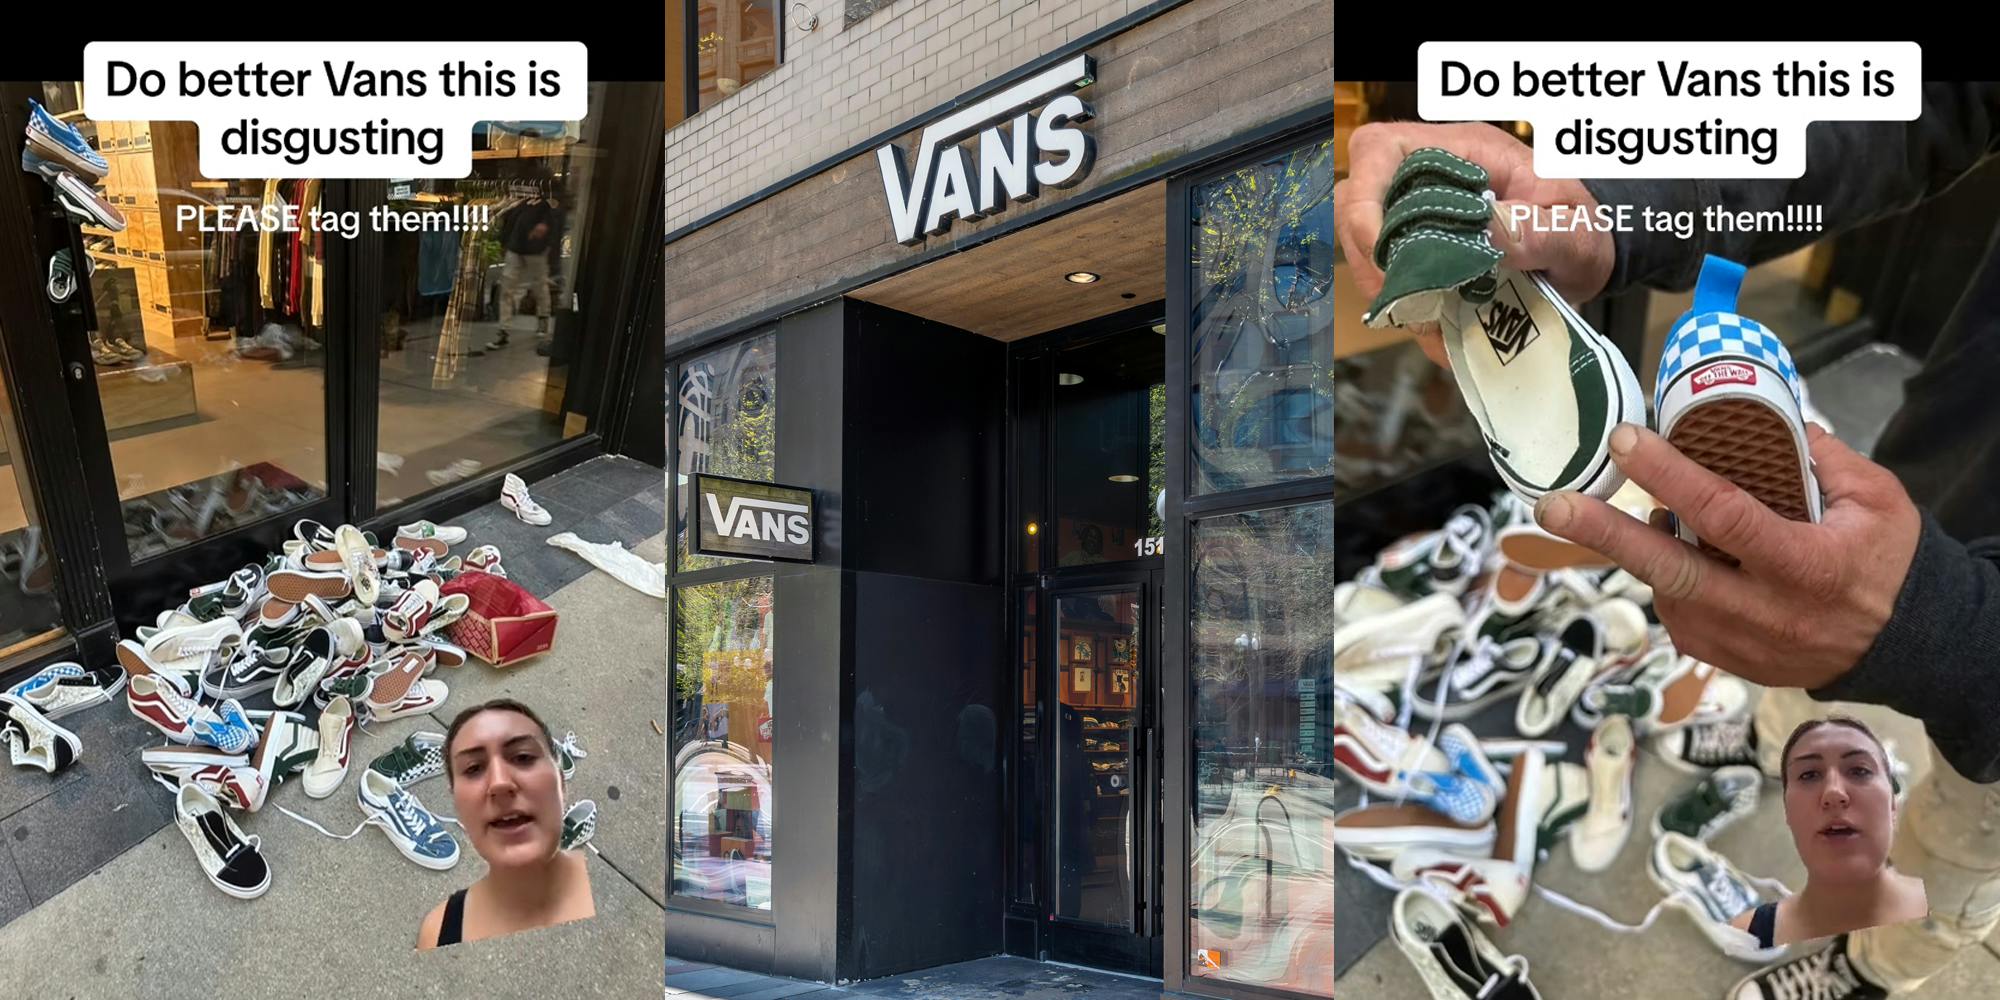 woman greenscreen TikTok over image of Vans shoes outside storefront with caption "Do better Vans this is disgusting PLEASE tag them!!!!" (l) Vans store with signs (c) woman greenscreen TikTok over image of Vans shoes slashed in hands outside storefront with caption "Do better Vans this is disgusting PLEASE tag them!!!!" (r)